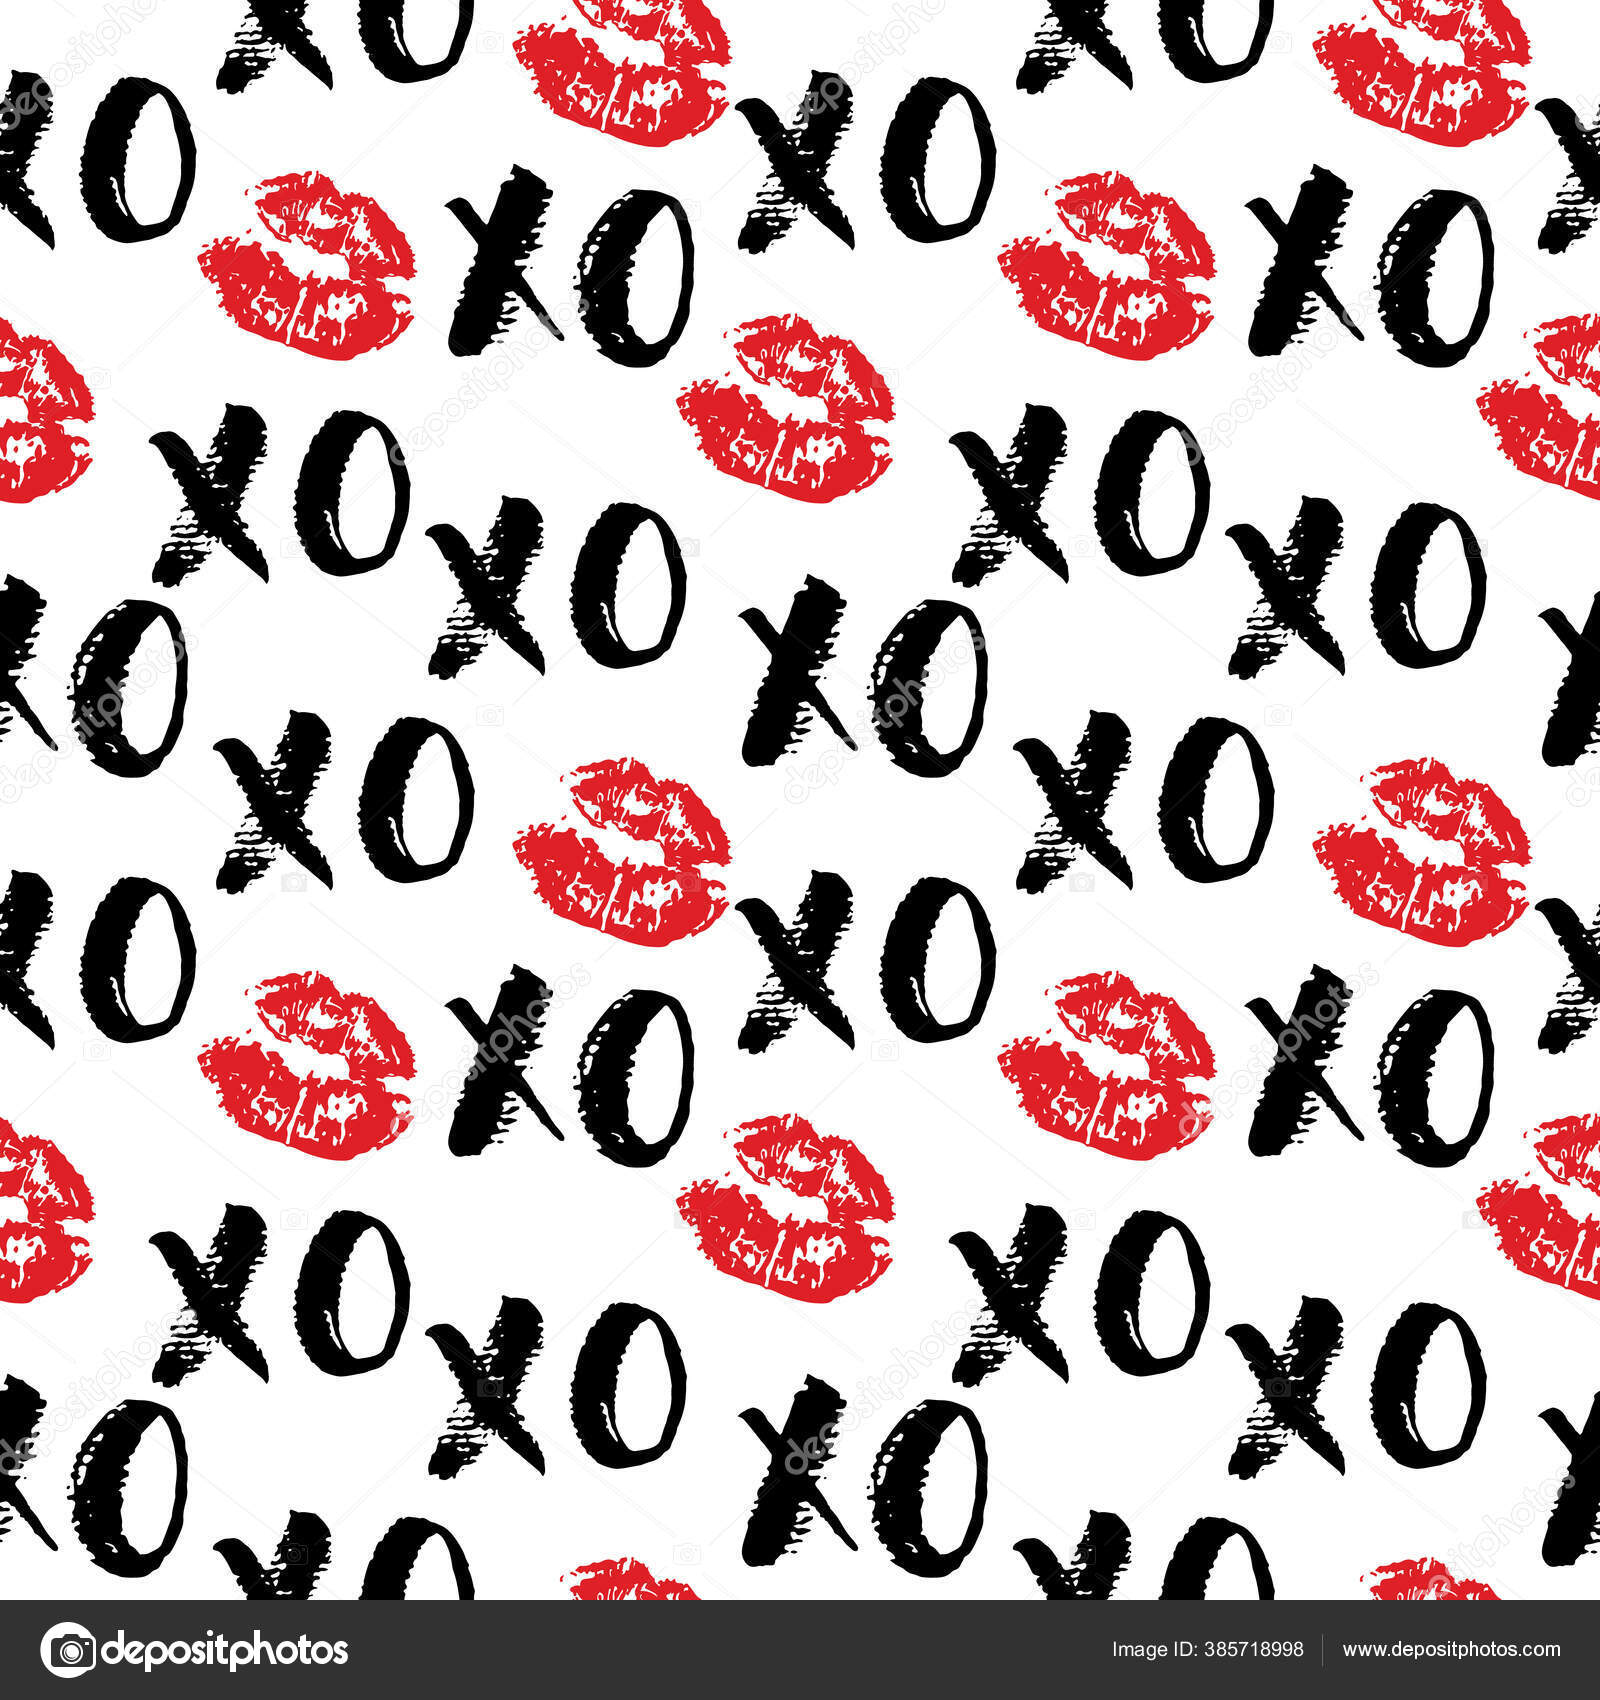 Xoxo Brush Lettering Signs Seamless Pattern Grunge Calligraphic